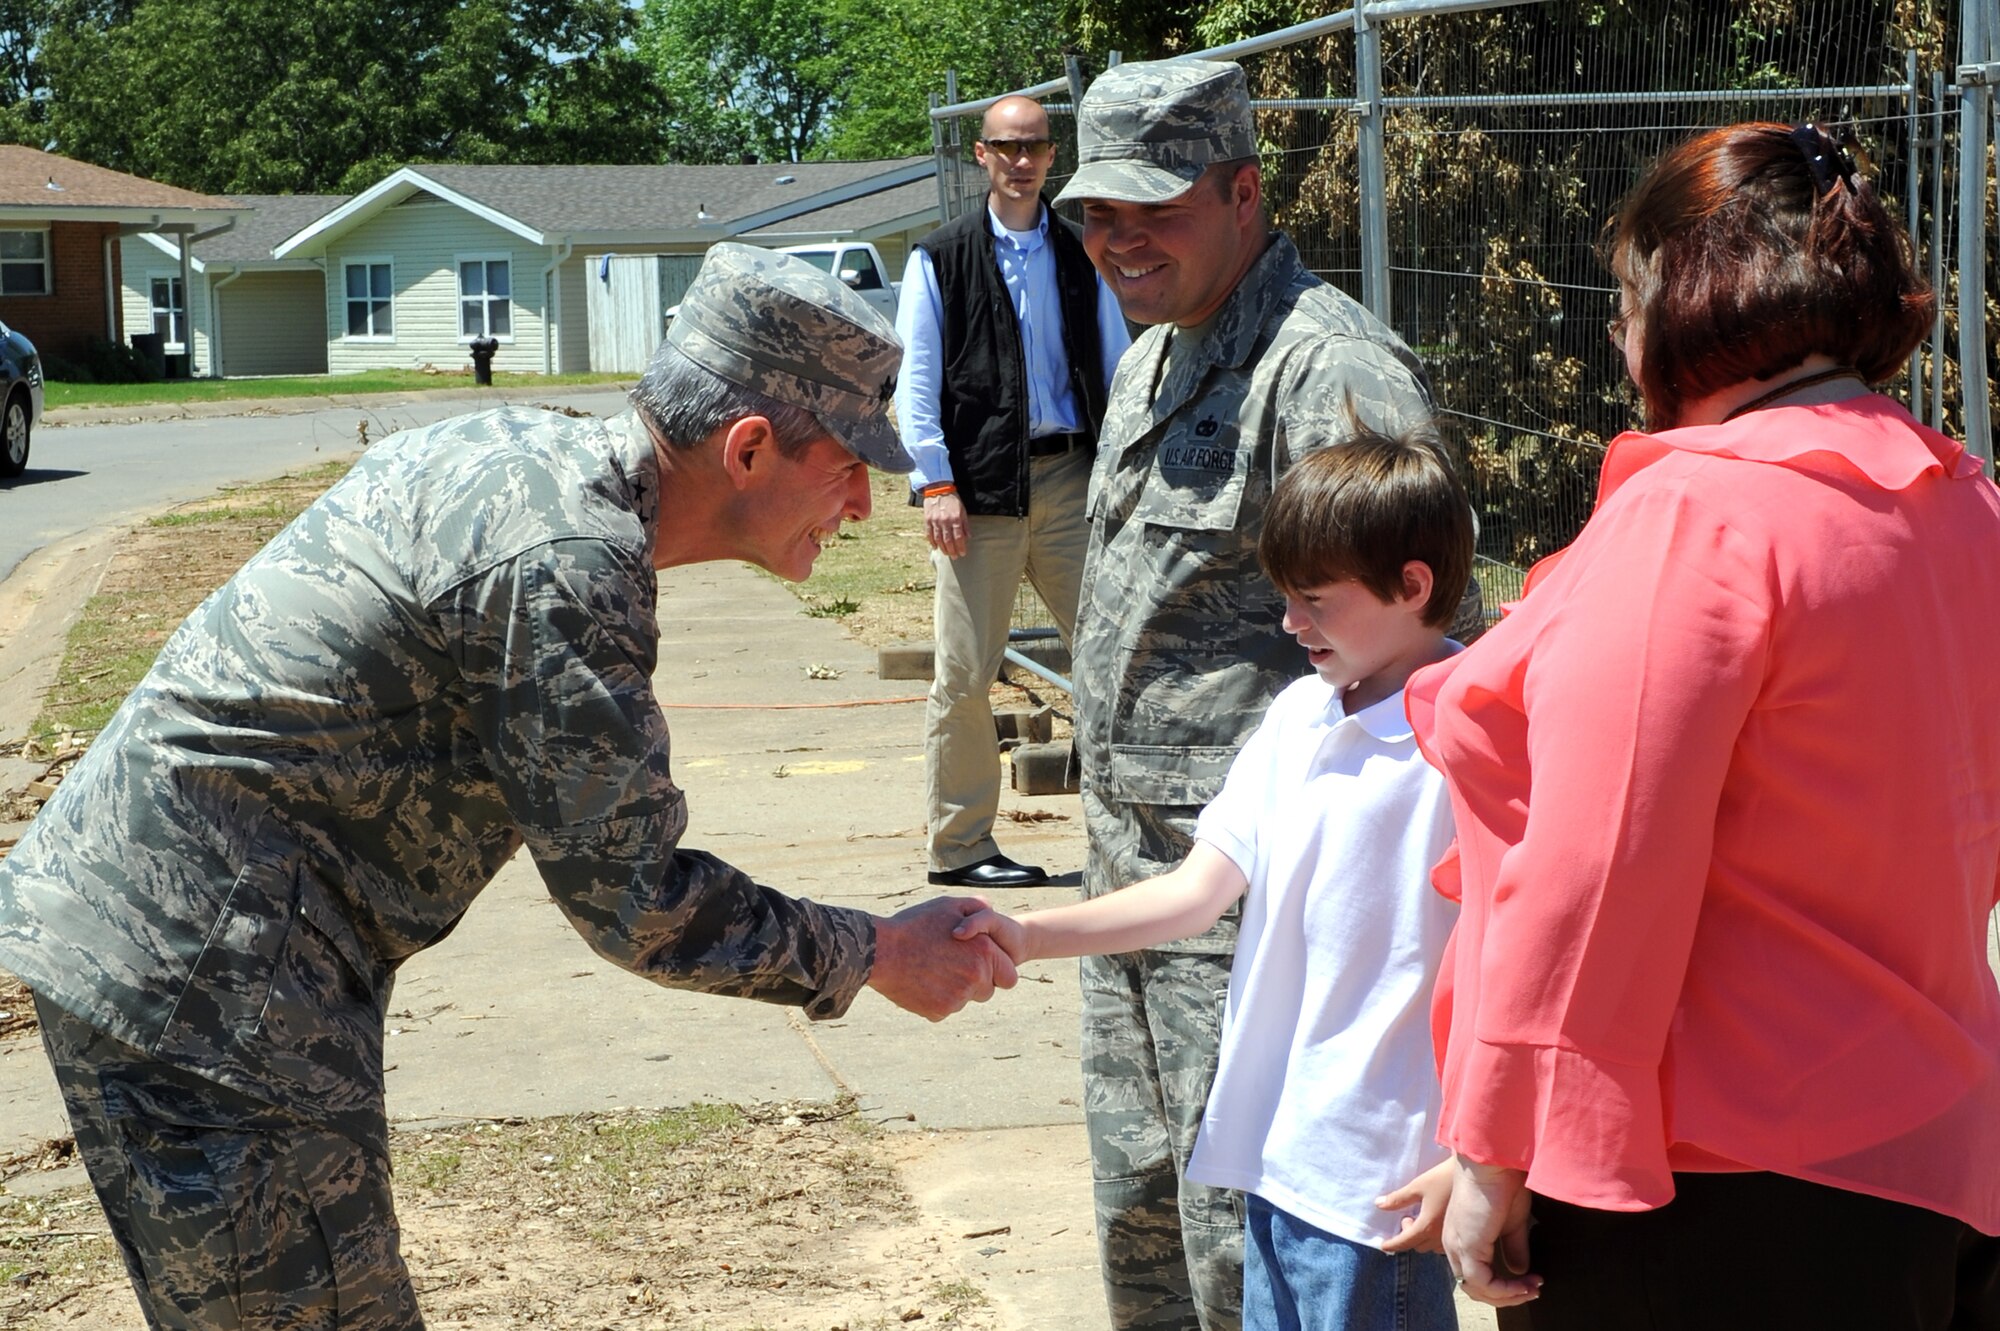 Air Force Chief of Staff Gen. Norton Schwartz shakes hands with Jesse, son of Staff Sgt. Eric Bramblett, outside their base house May 4, 2011, at Little Rock Air Force Base, Ark., during a base visit. Sergeant Bramblett, a 19th Logistics Readiness Squadron vehicle operator and dispatcher, returned from a deployment to Iraq after his house was destroyed by the tornado that hit Little Rock Air Force Base April 25. (U.S. Air Force photo/Airman 1st Class Rusty Frank)